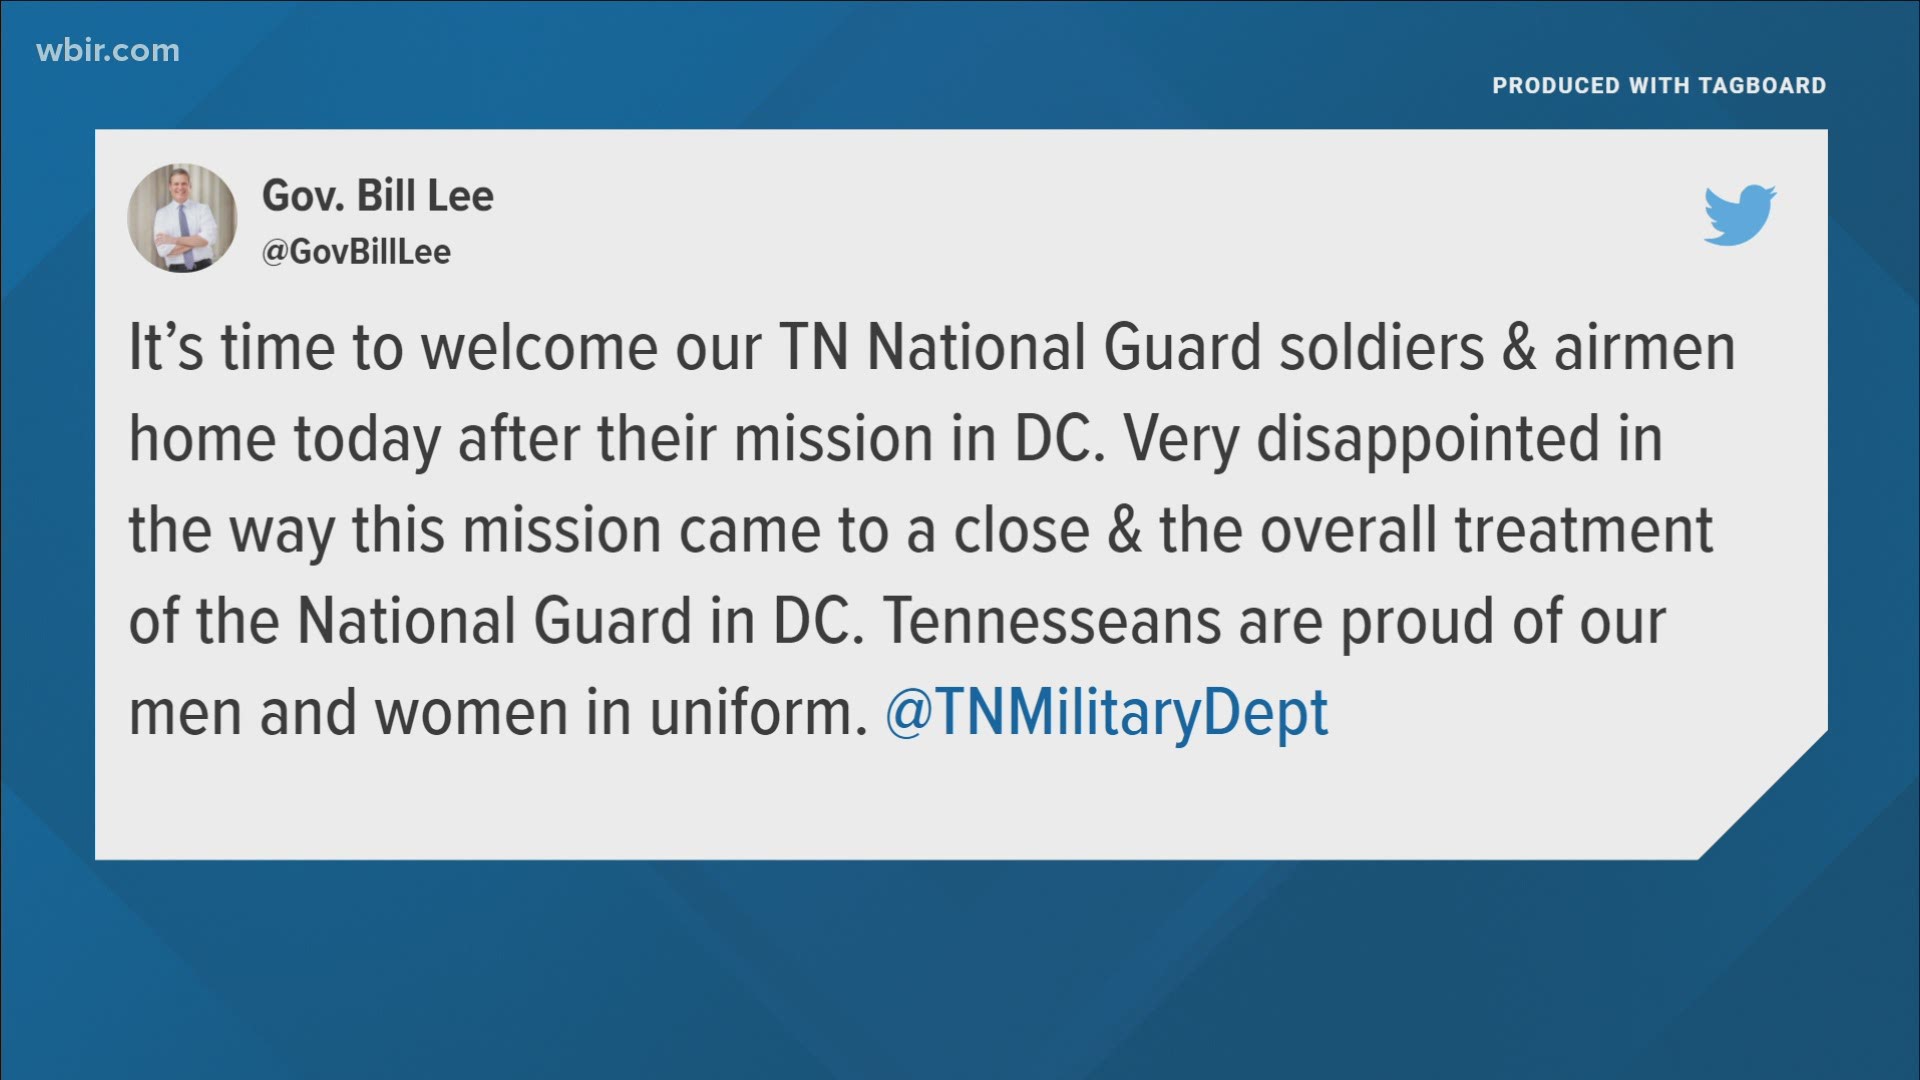 Gov. Bill Lee said he's unhappy about how Tennessee National Guard forces were treated this week in Washington, DC. They're now back in the state.